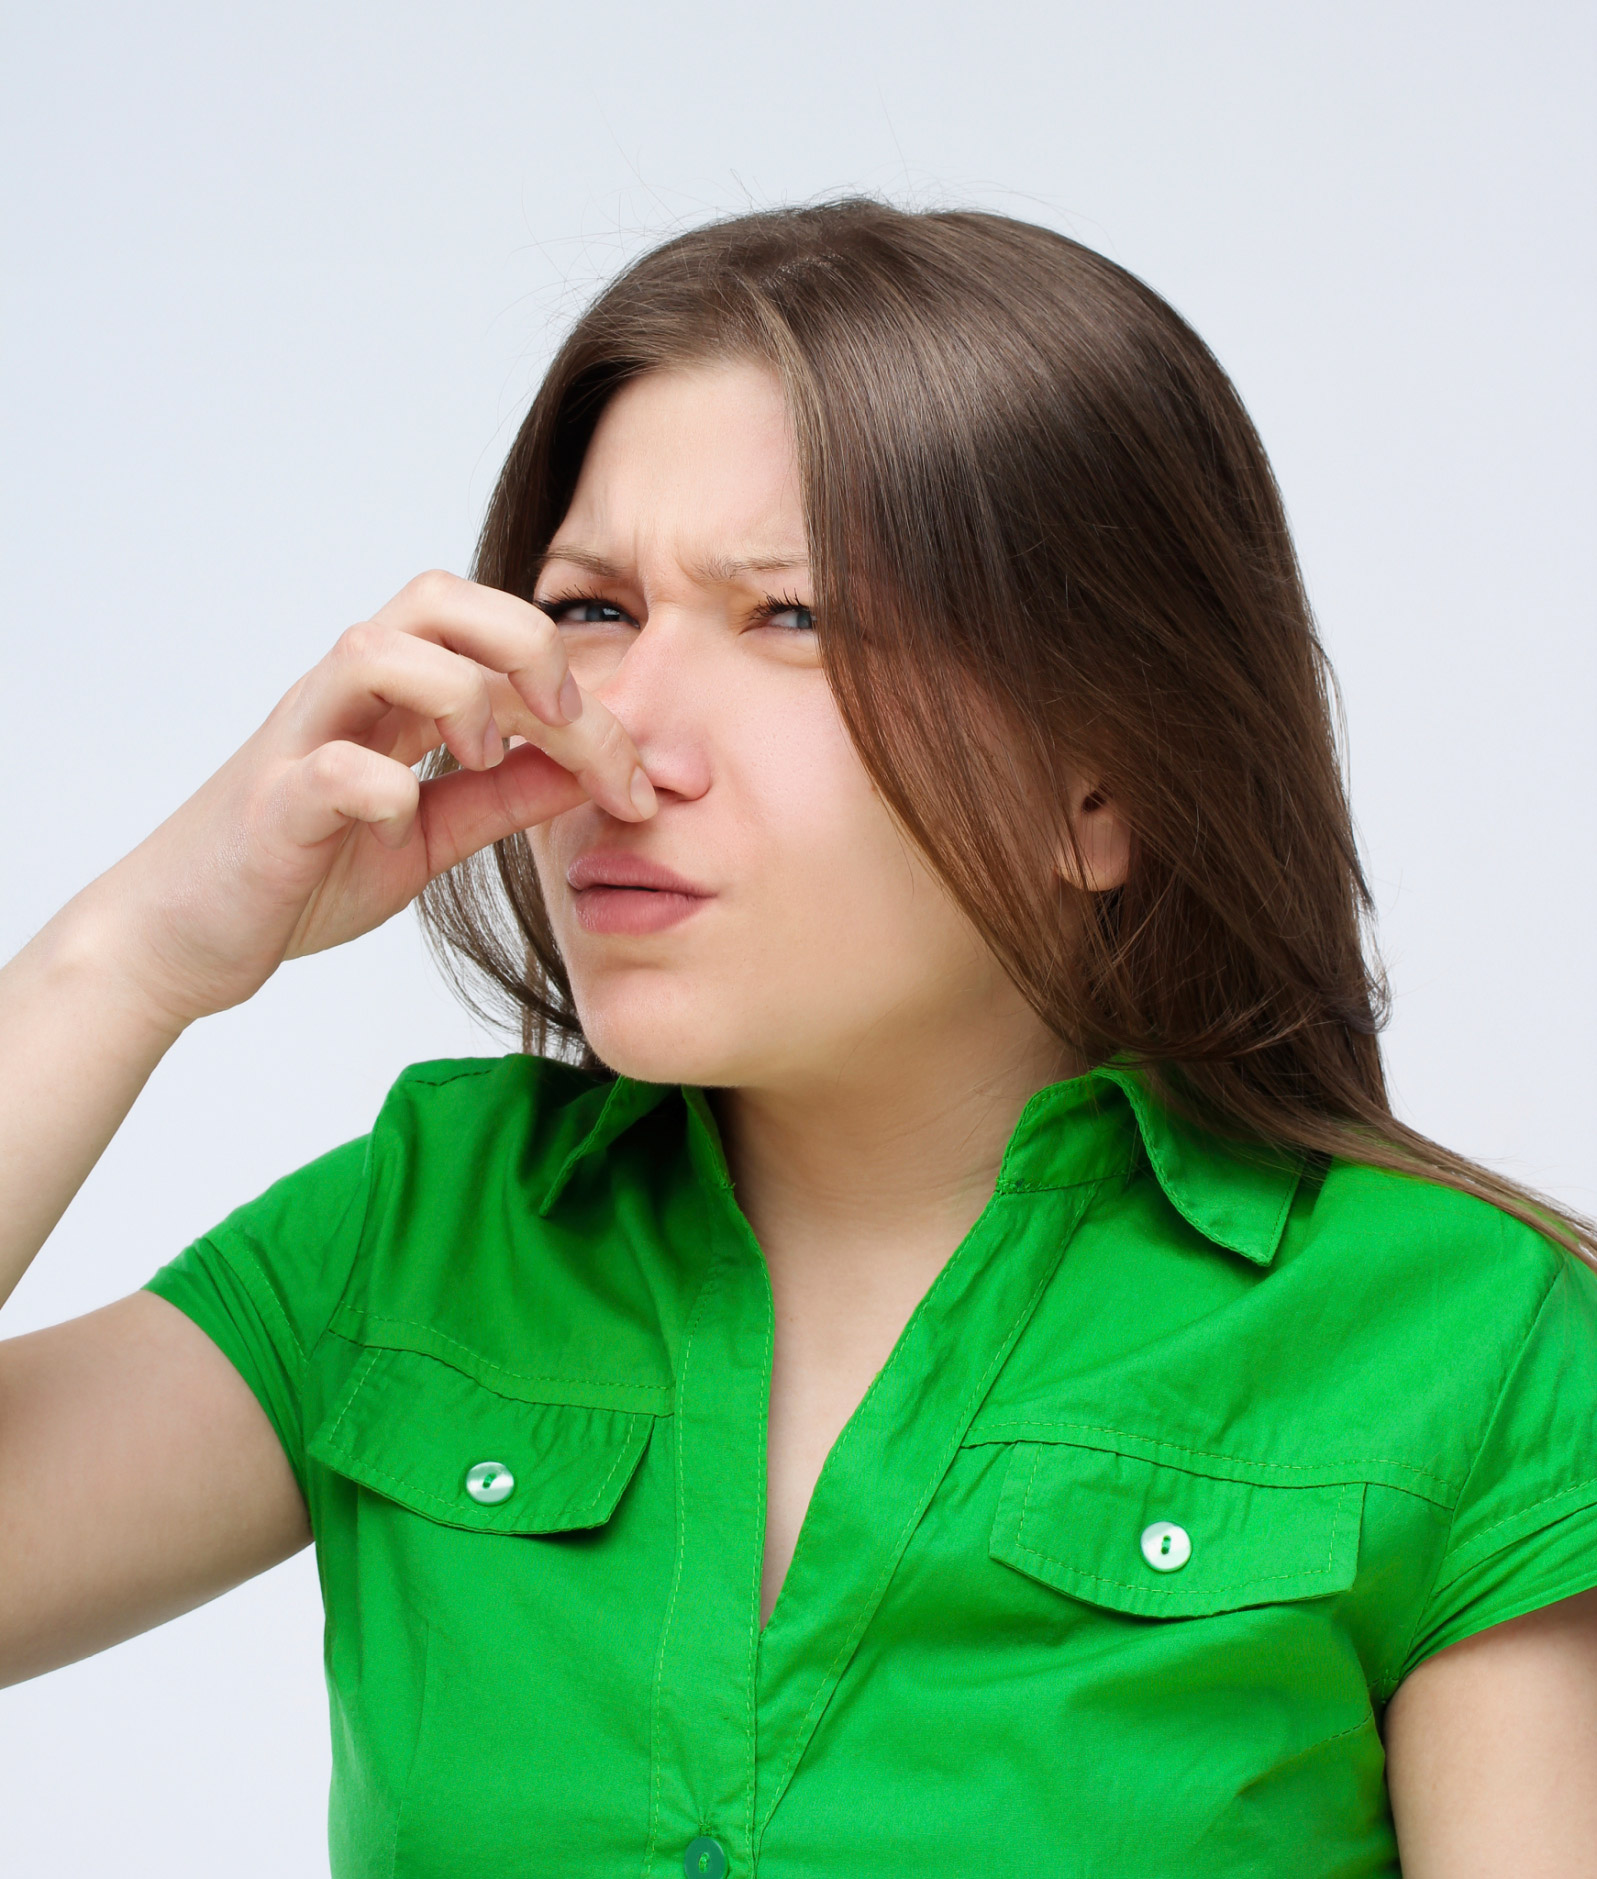 Sniffing Out the Science of Body Odor - Ask The Scientists